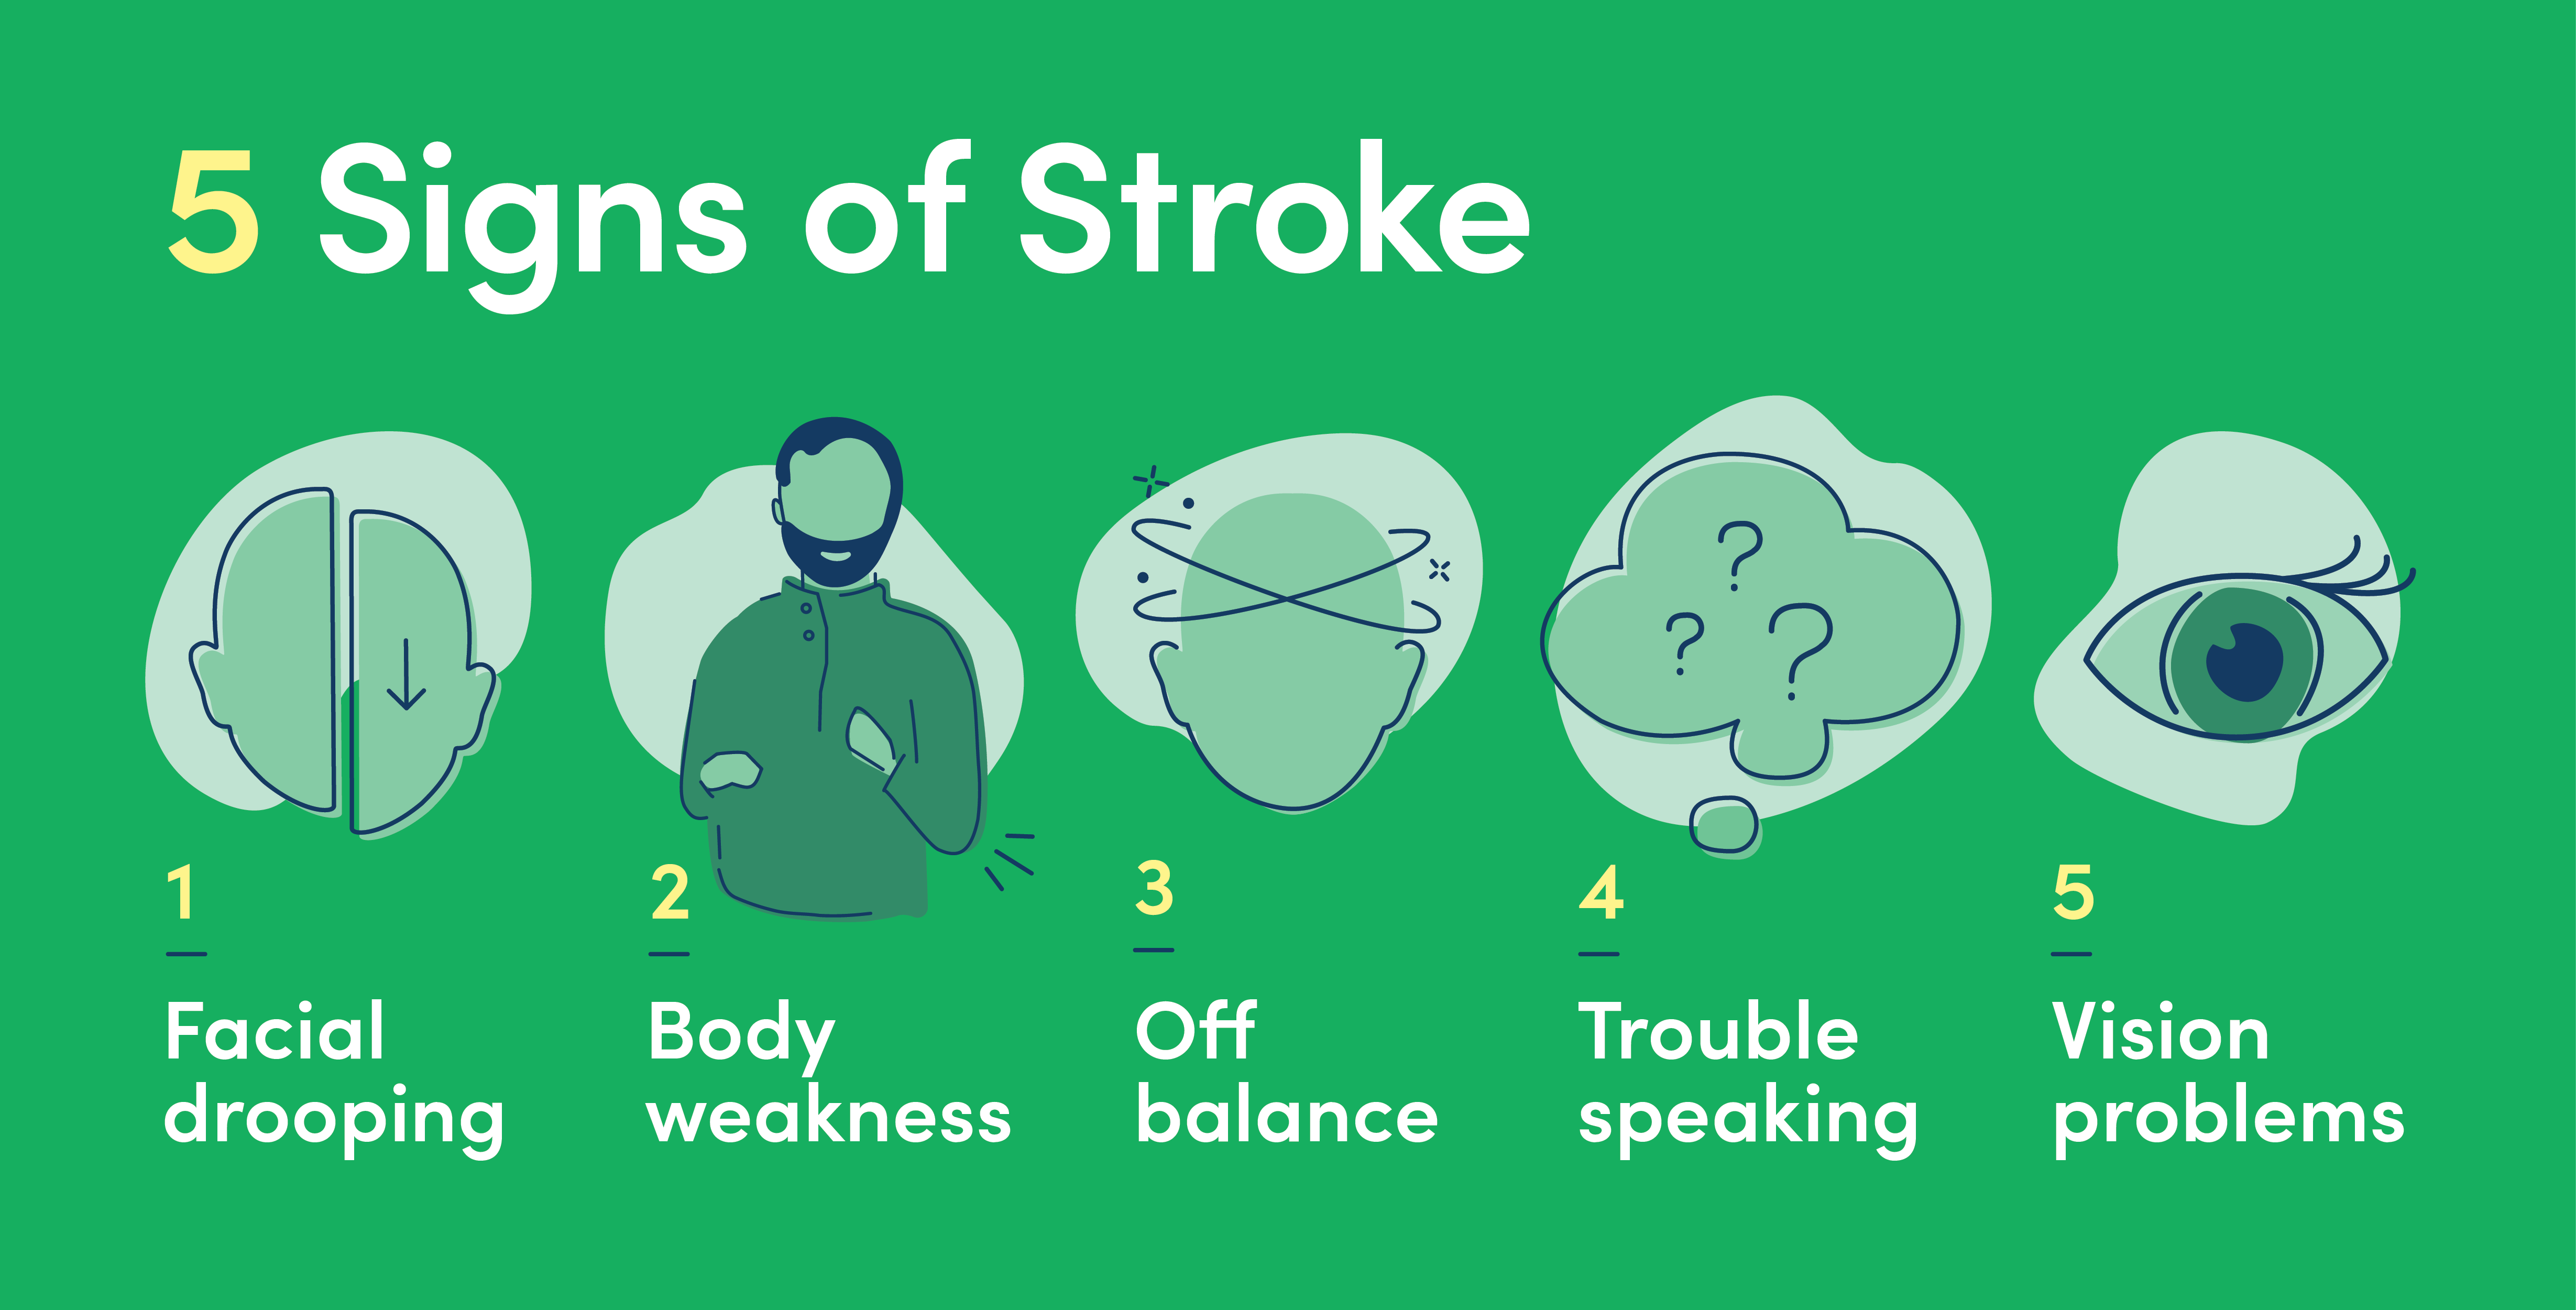 the five stroke symptoms include facial drooping, body weakness, off balance, trouble speaking, and vision problems